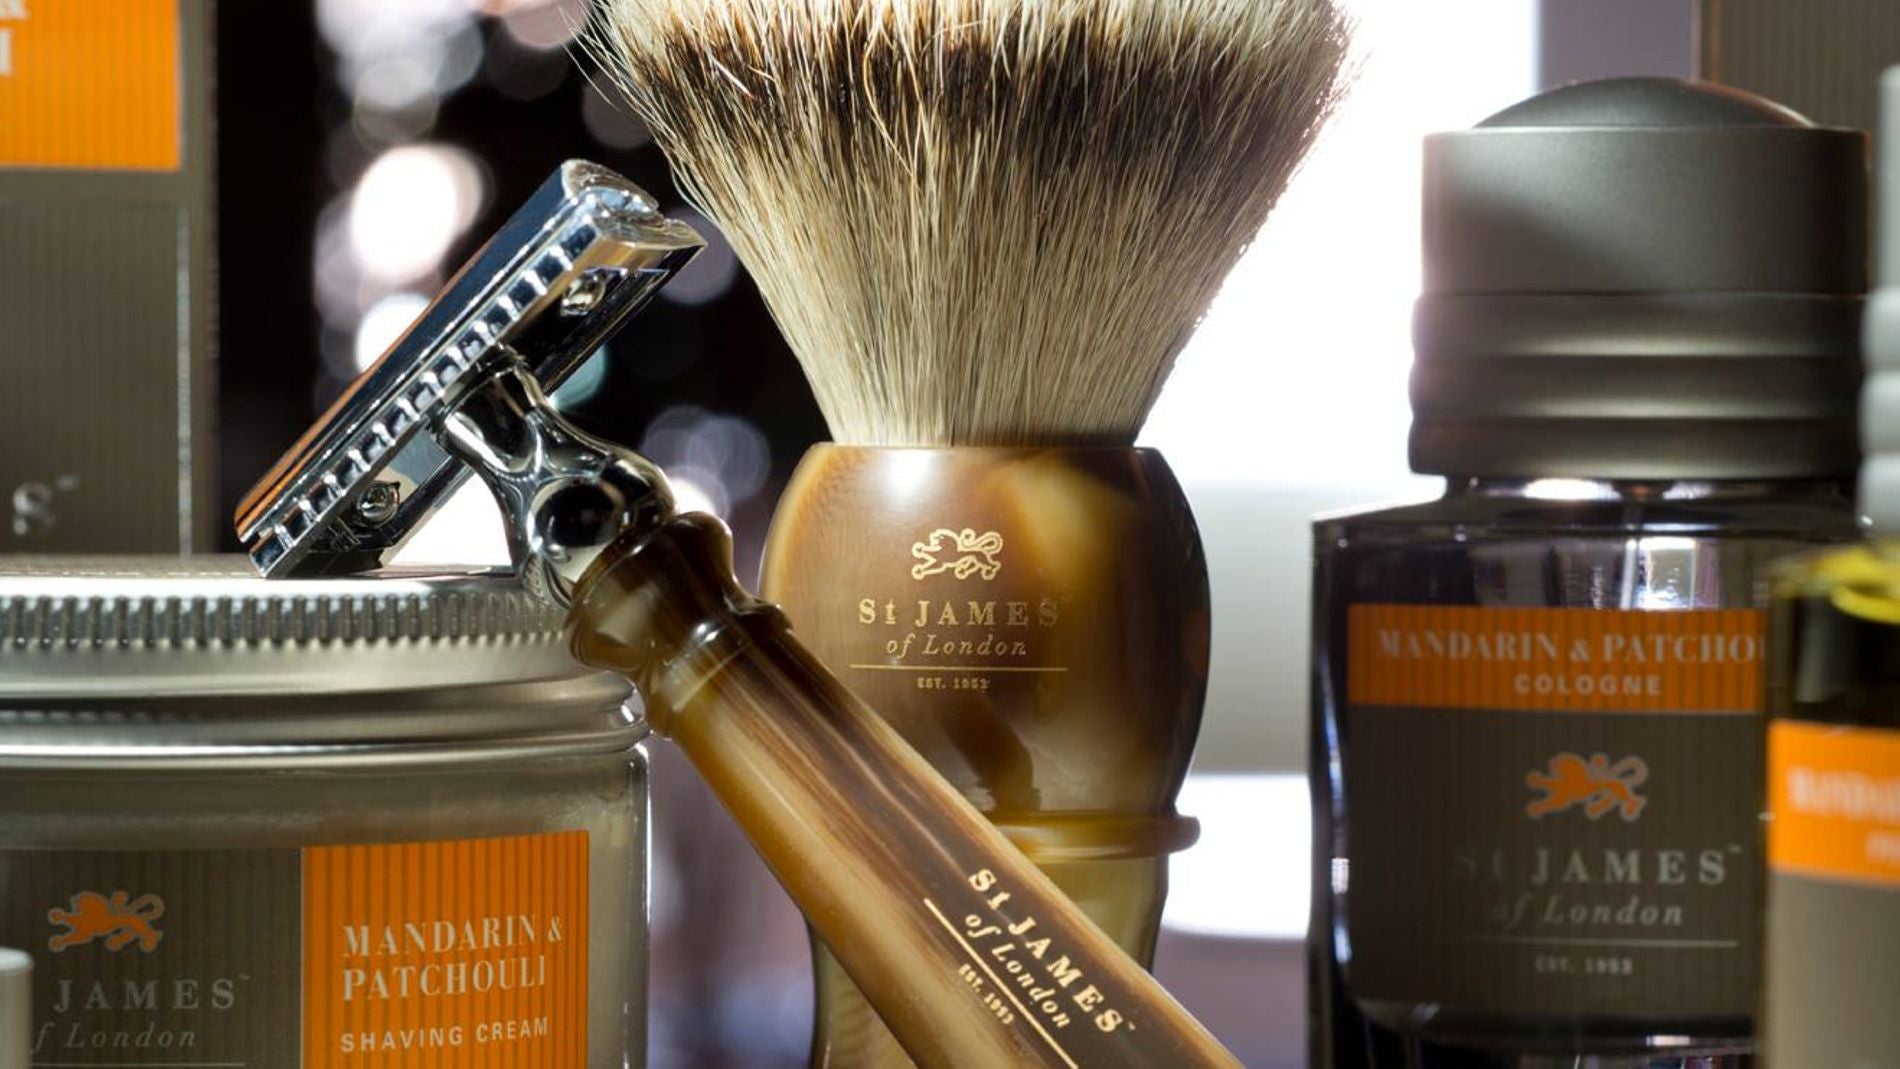 St James of London Shaving and Grooming at J. Men's Clothing